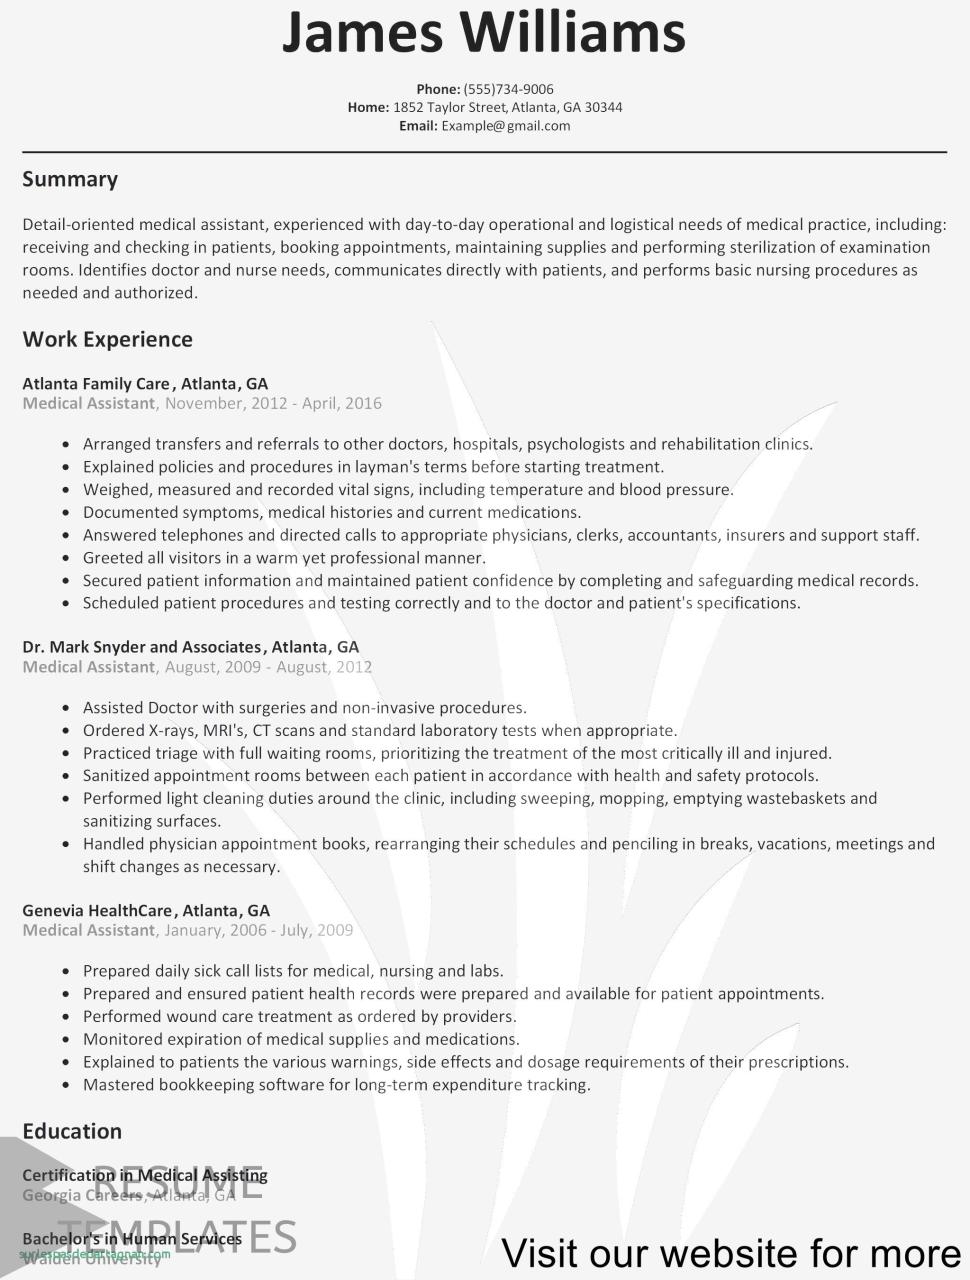 Blank Cv Template For Students